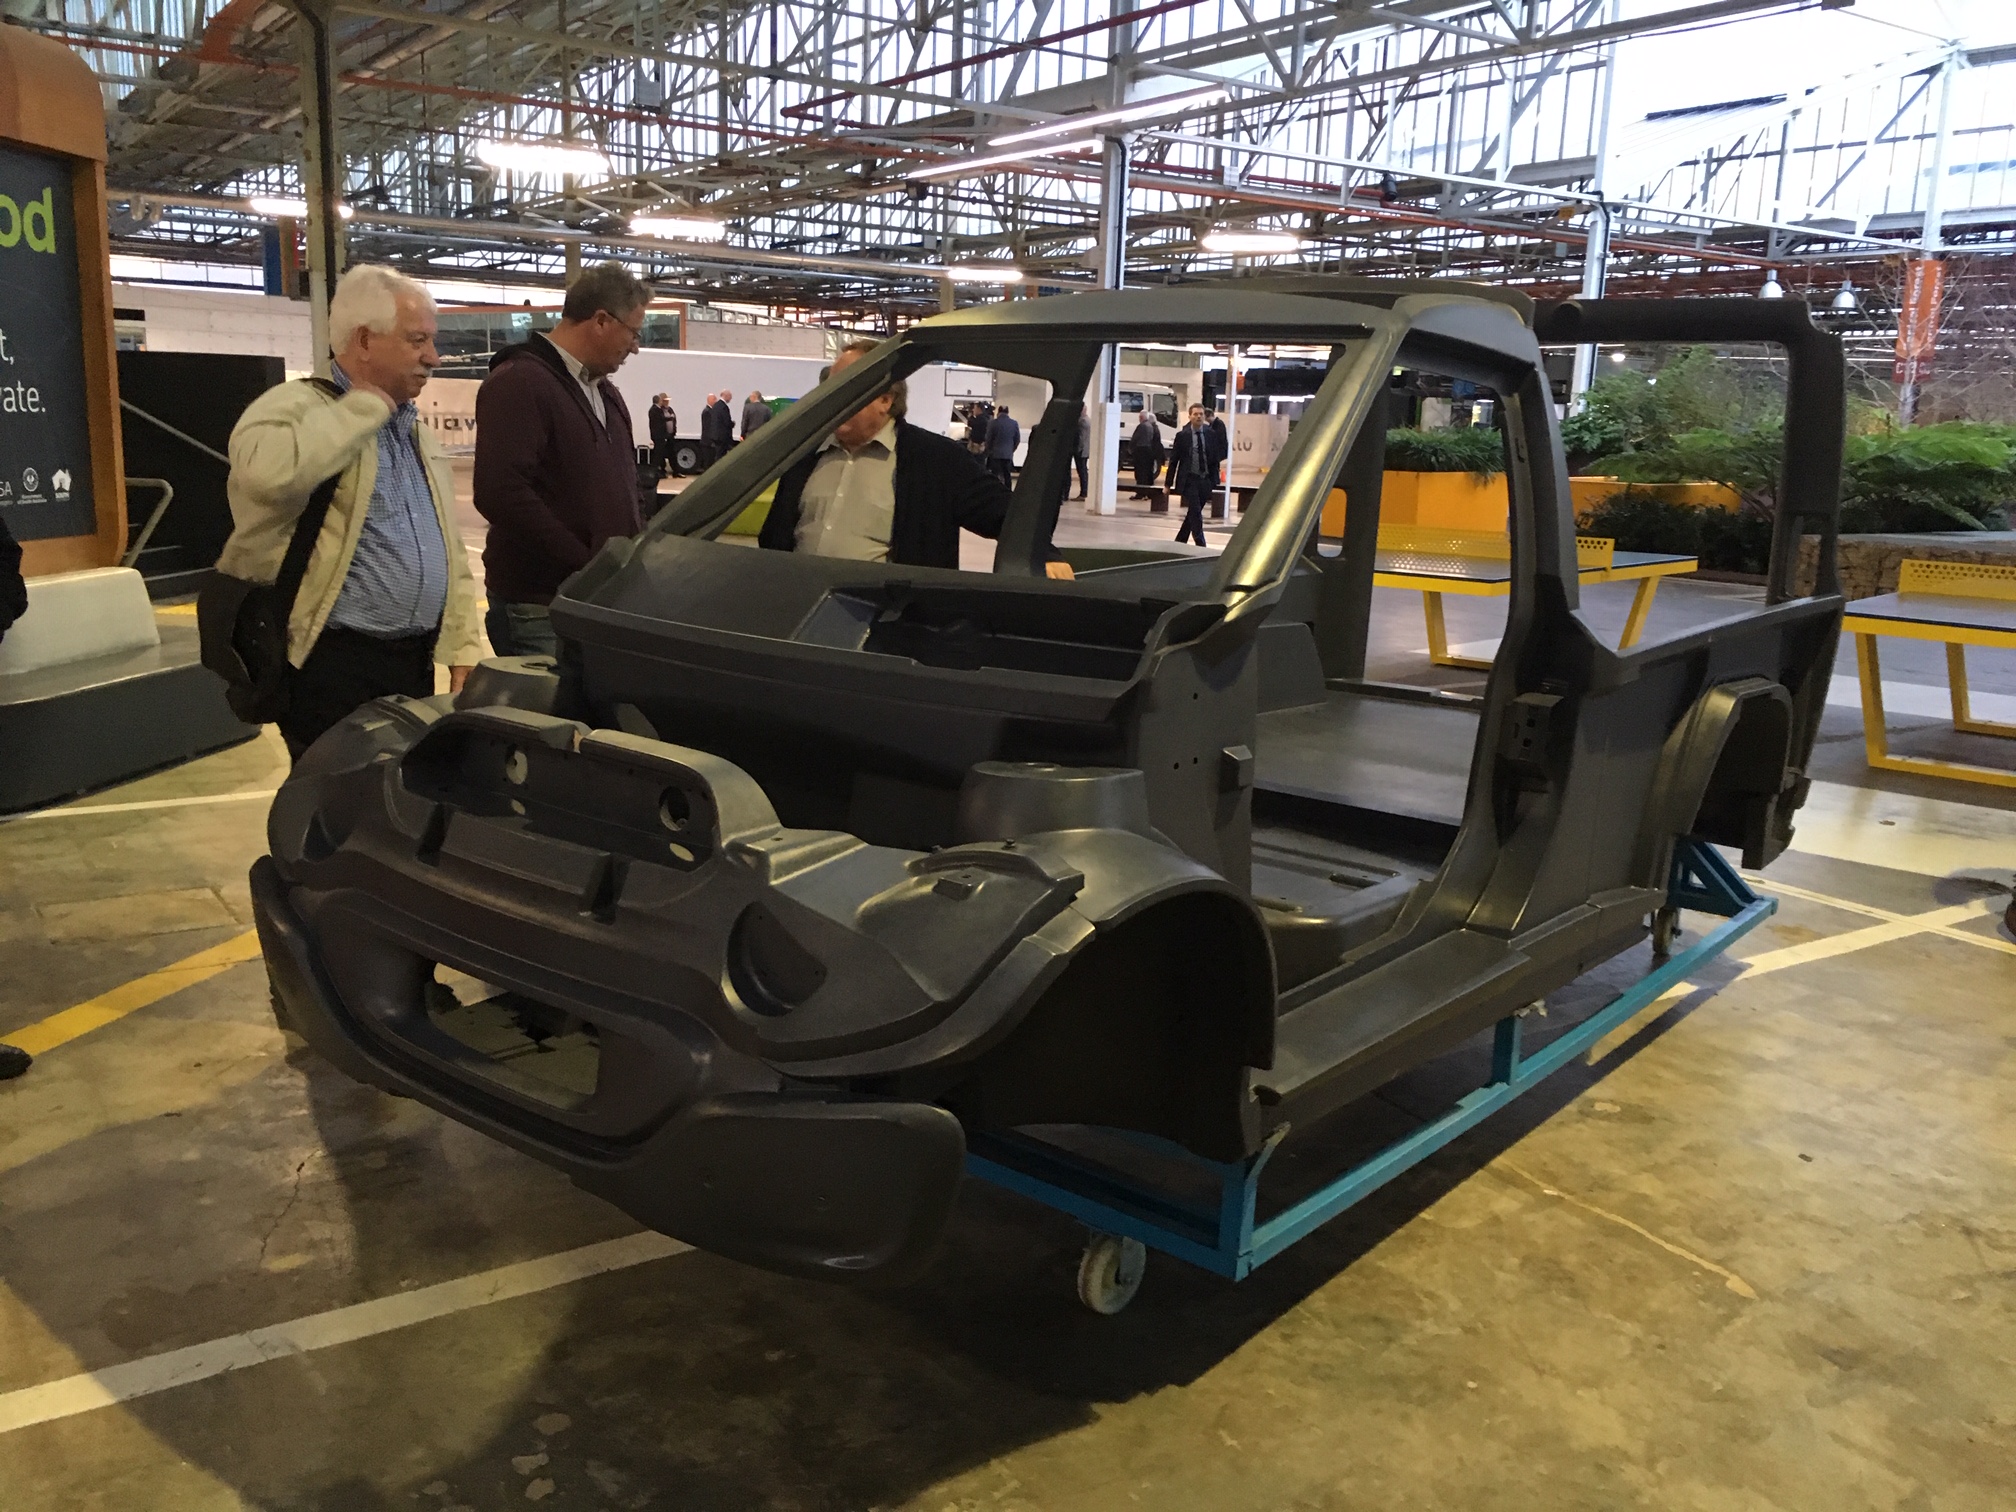 AuManufacturing First Ace electric vans assembled in Adelaide ACE